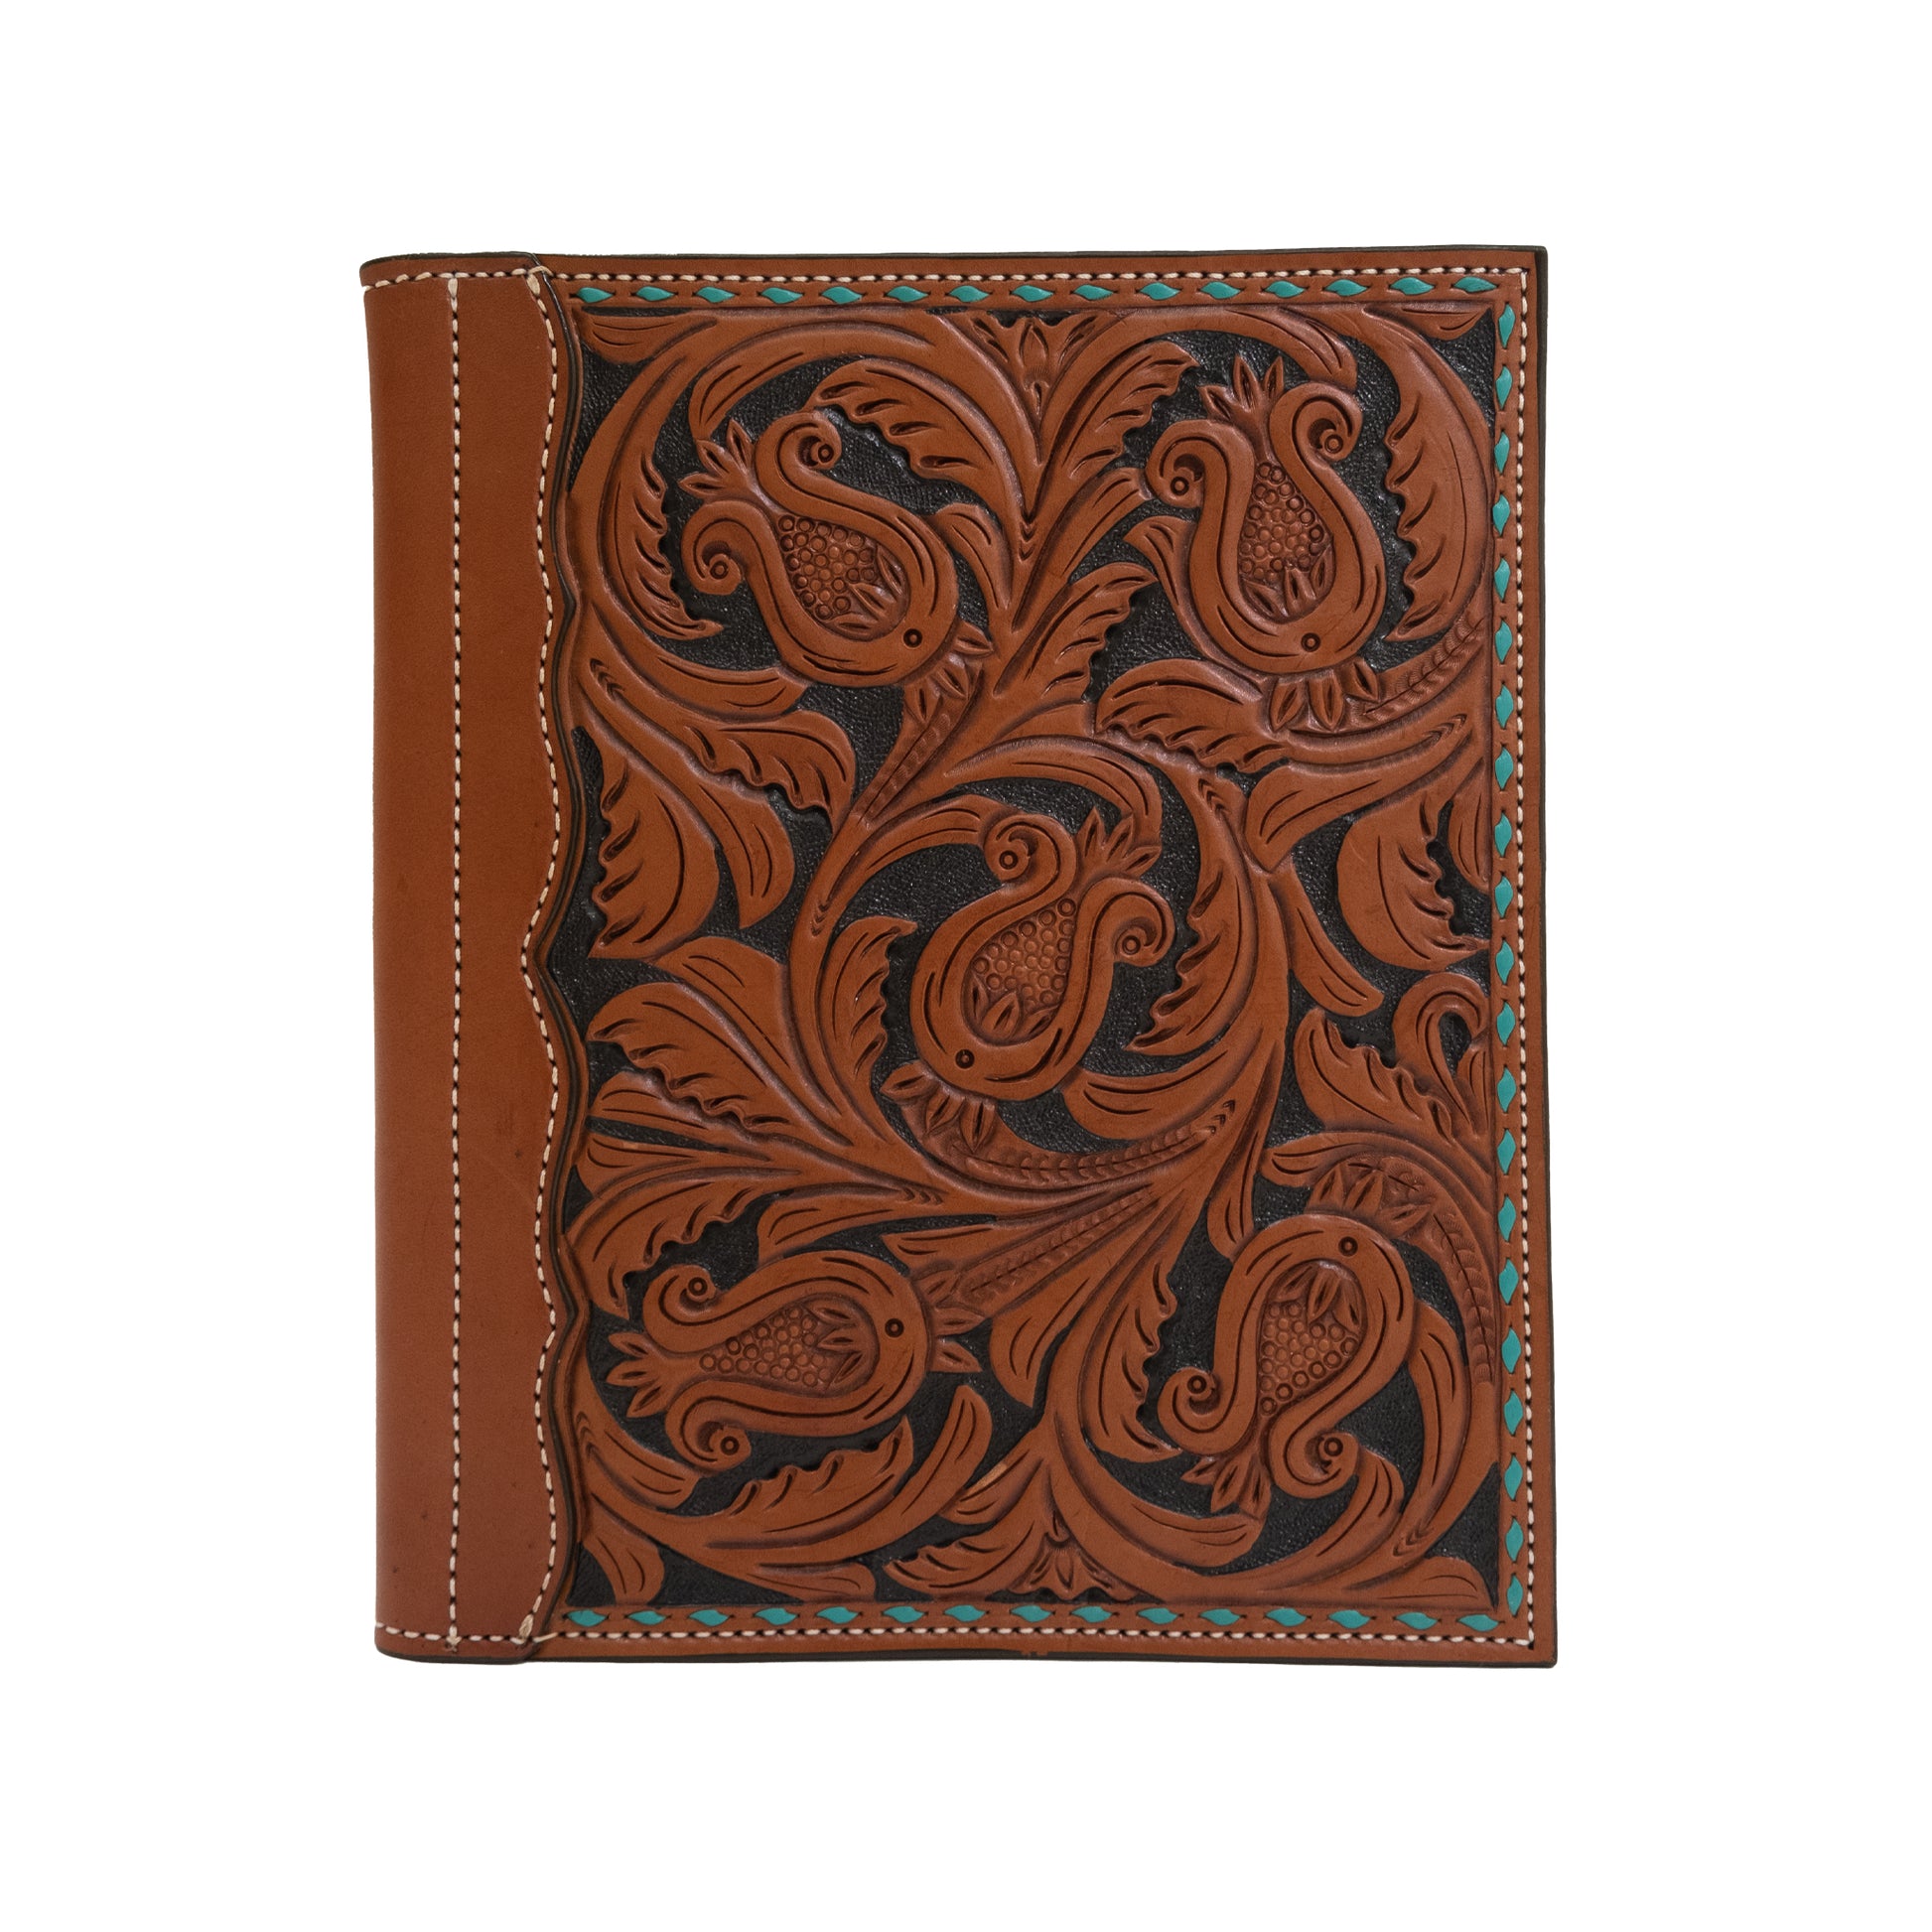 Large portfolio toast leather AA tooling with black background paint, teal buckstitch, and an antique finish. Perfect for any cowboy's or cowgirl's business meeting.